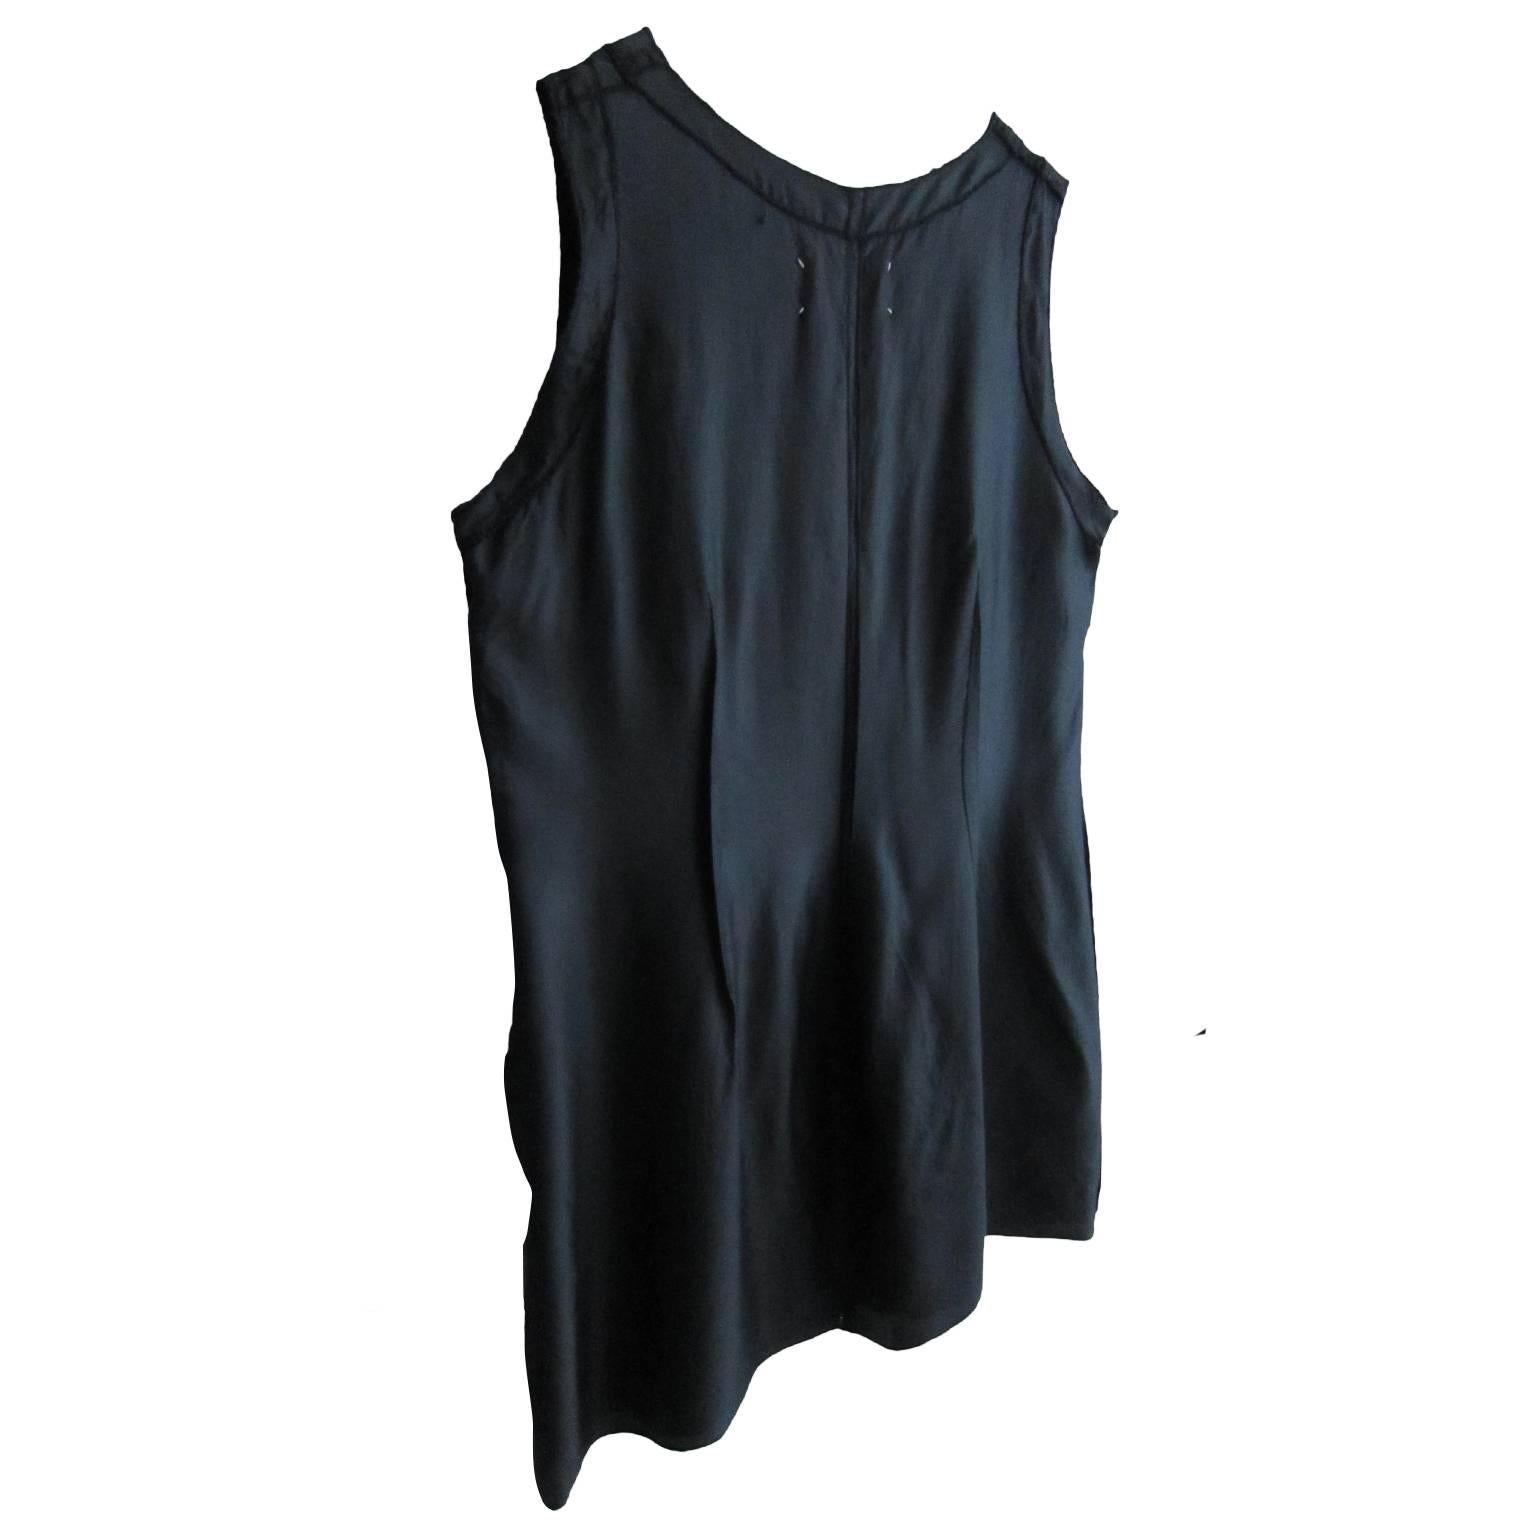 Maison Martin Margiela tank top with exposed stitch detail with side zip SS 1991 / AW 1994.
